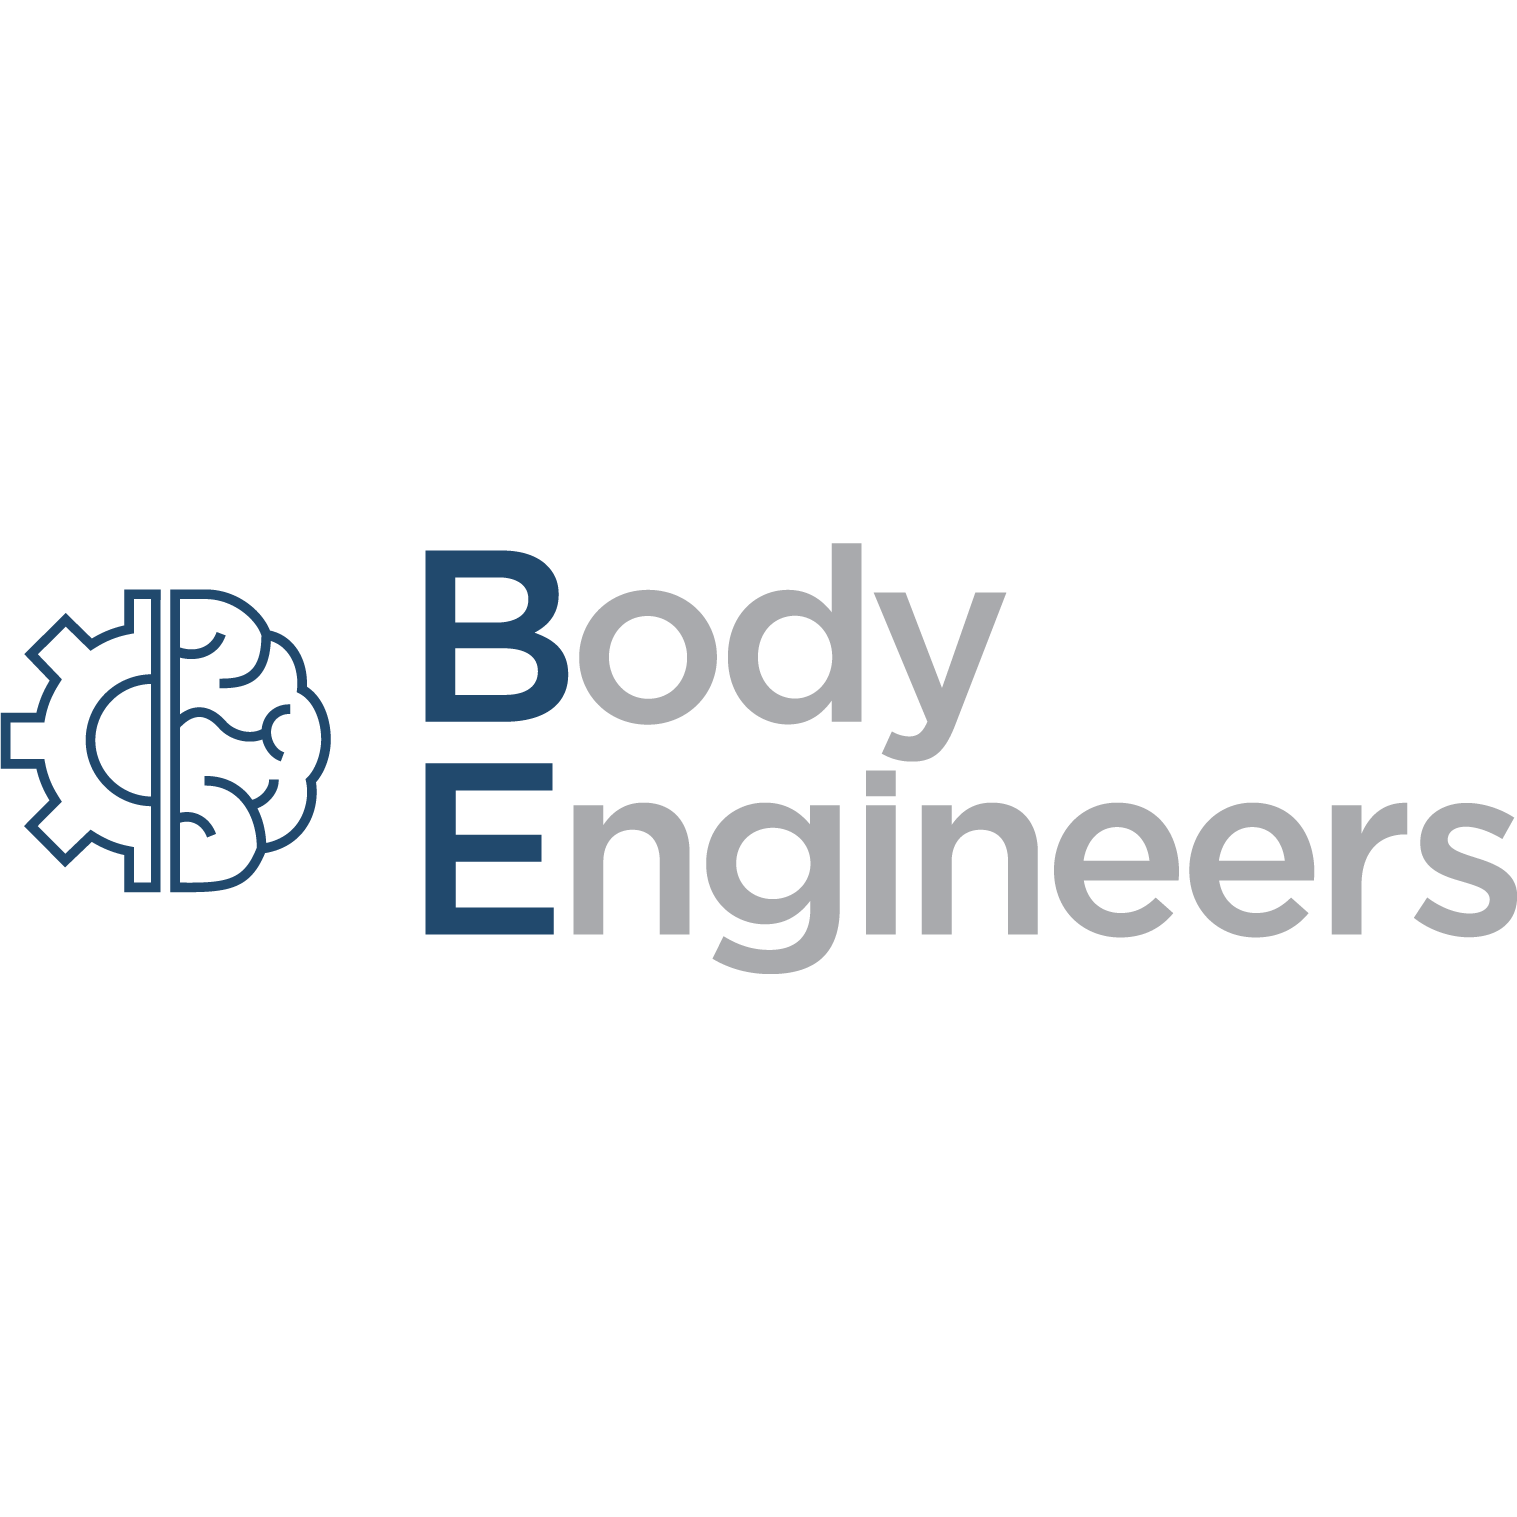 The Body Engineers